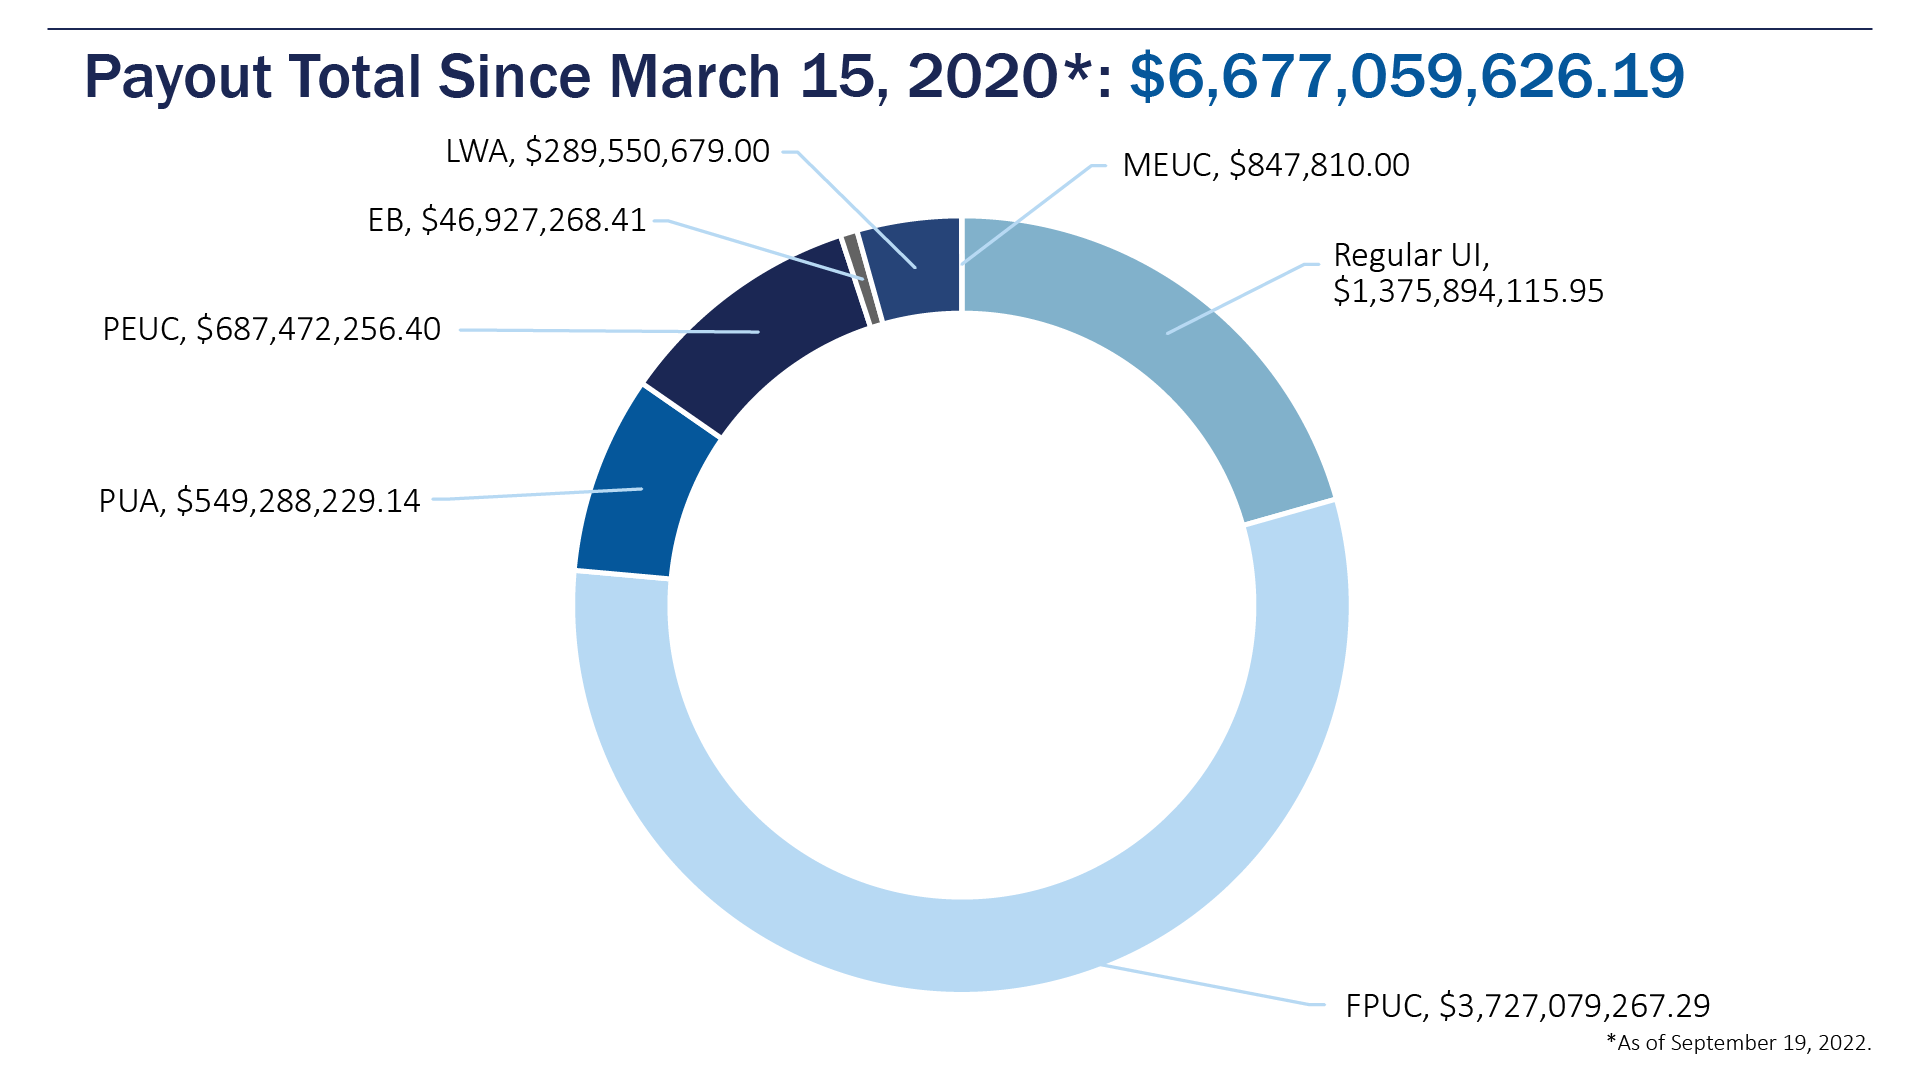 Total Payout since March 2020